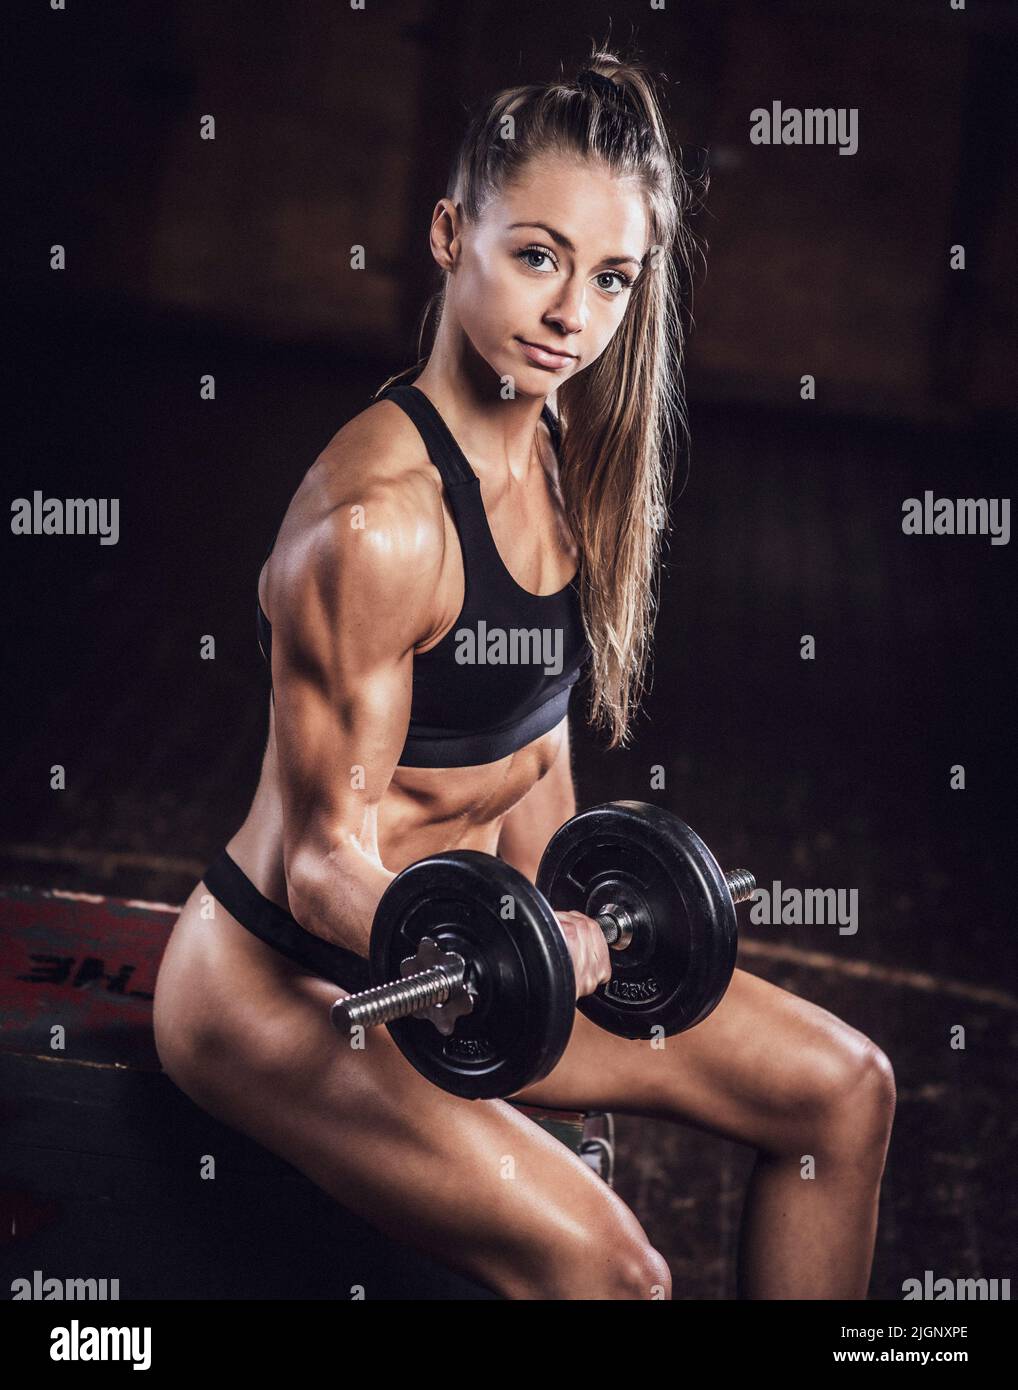 Female fitness model with toned body working out with weights, UK Stock Photo